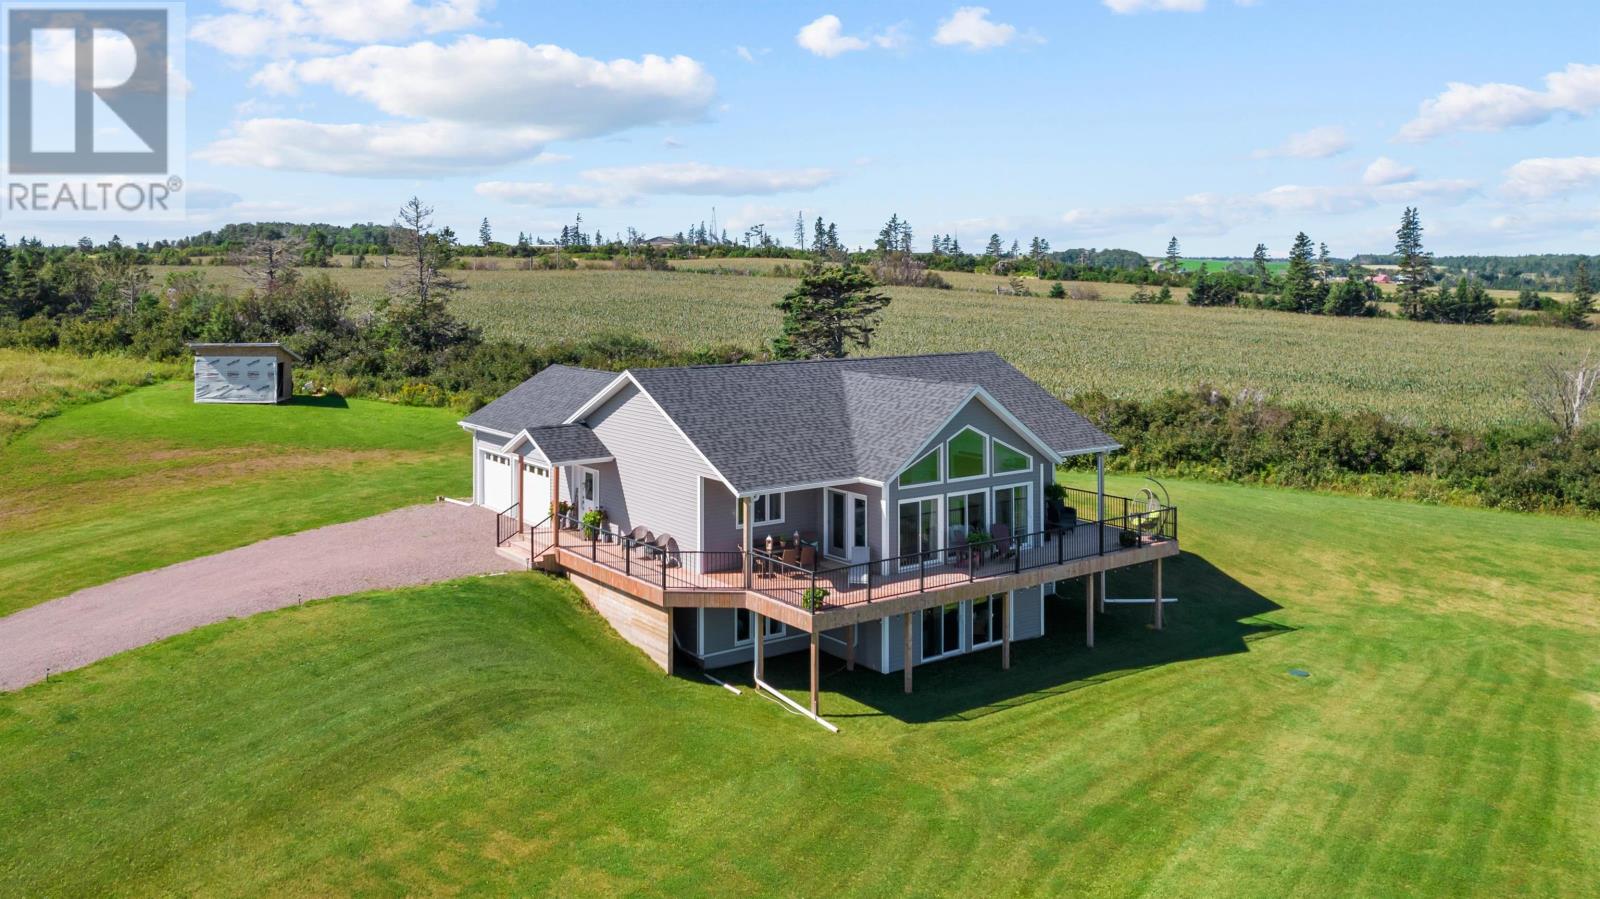 903 Grand Pere Point Road903 Grand Pere Point Road, Rustico, Prince Edward Island C0A1N0, 4 Bedrooms Bedrooms, ,3 BathroomsBathrooms,Single Family,For Sale,903 Grand Pere Point Road,202318406